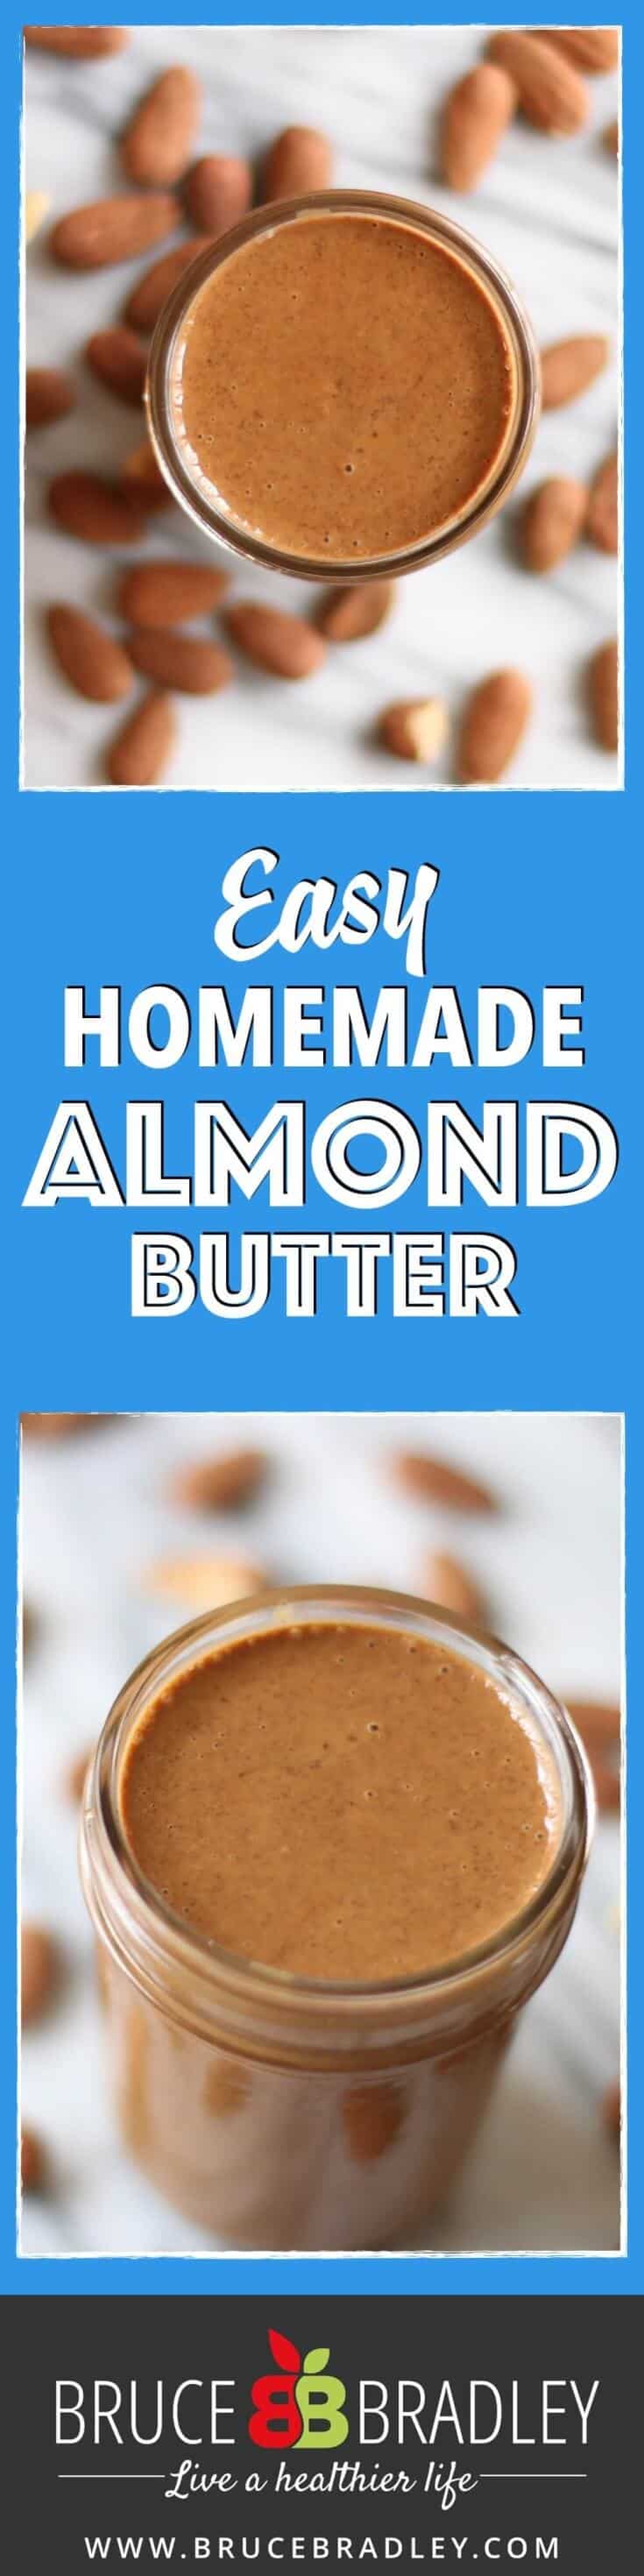 Homemade Almond Butter Is A Deliciously Easy Way To Start Eating Healthier While Saving Some Money!